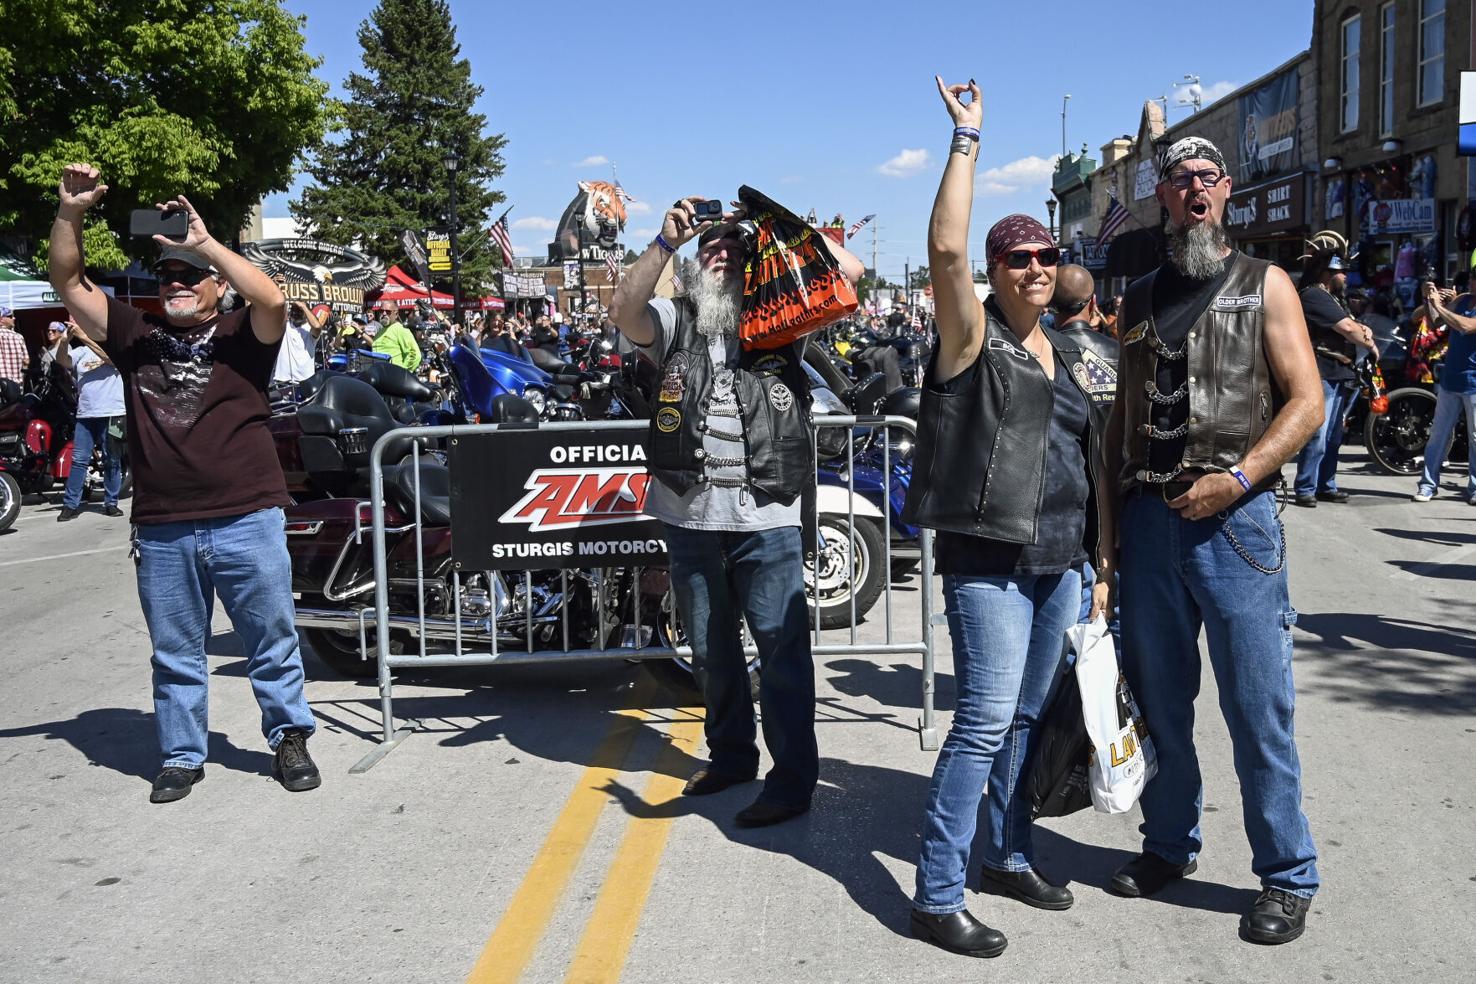 PHOTOS and VIDEO Rally goers brave the heat as Sturgis Motorcyle Rally